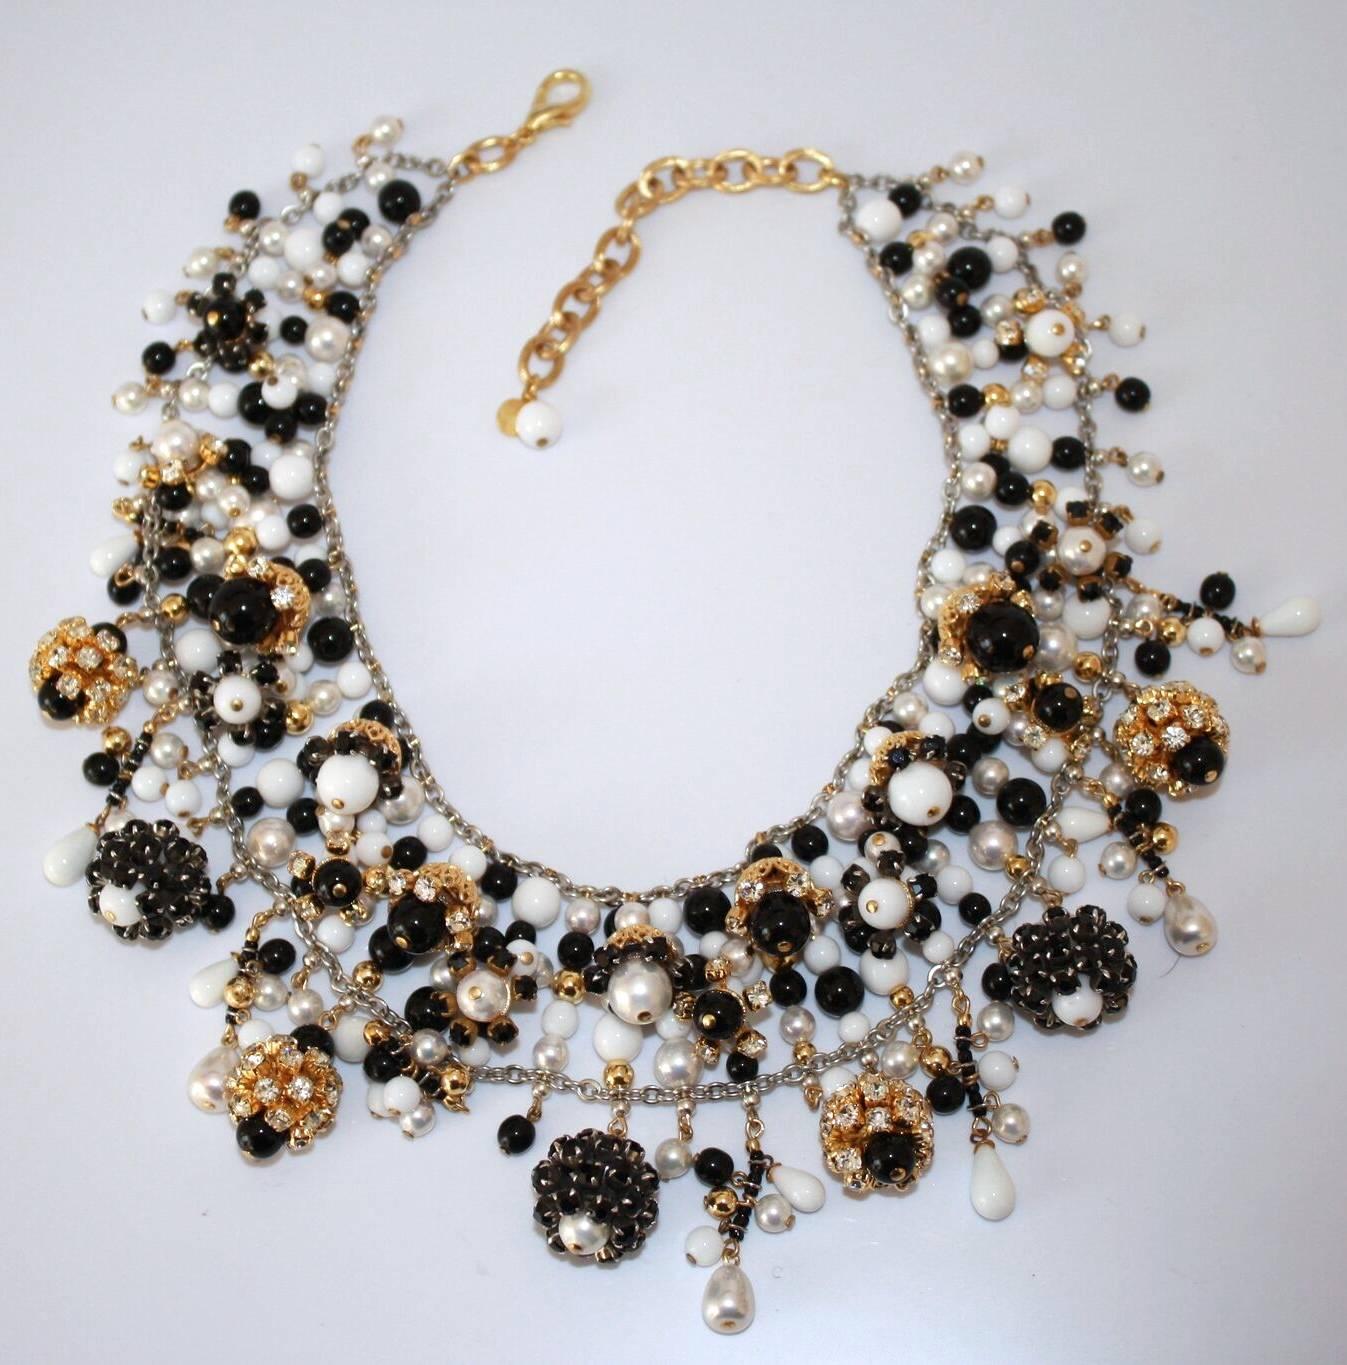 A famous style from Francoise Montague. Hand beaded collar necklace in chic black and white glass pearls with Swarovski crystal details. 

15